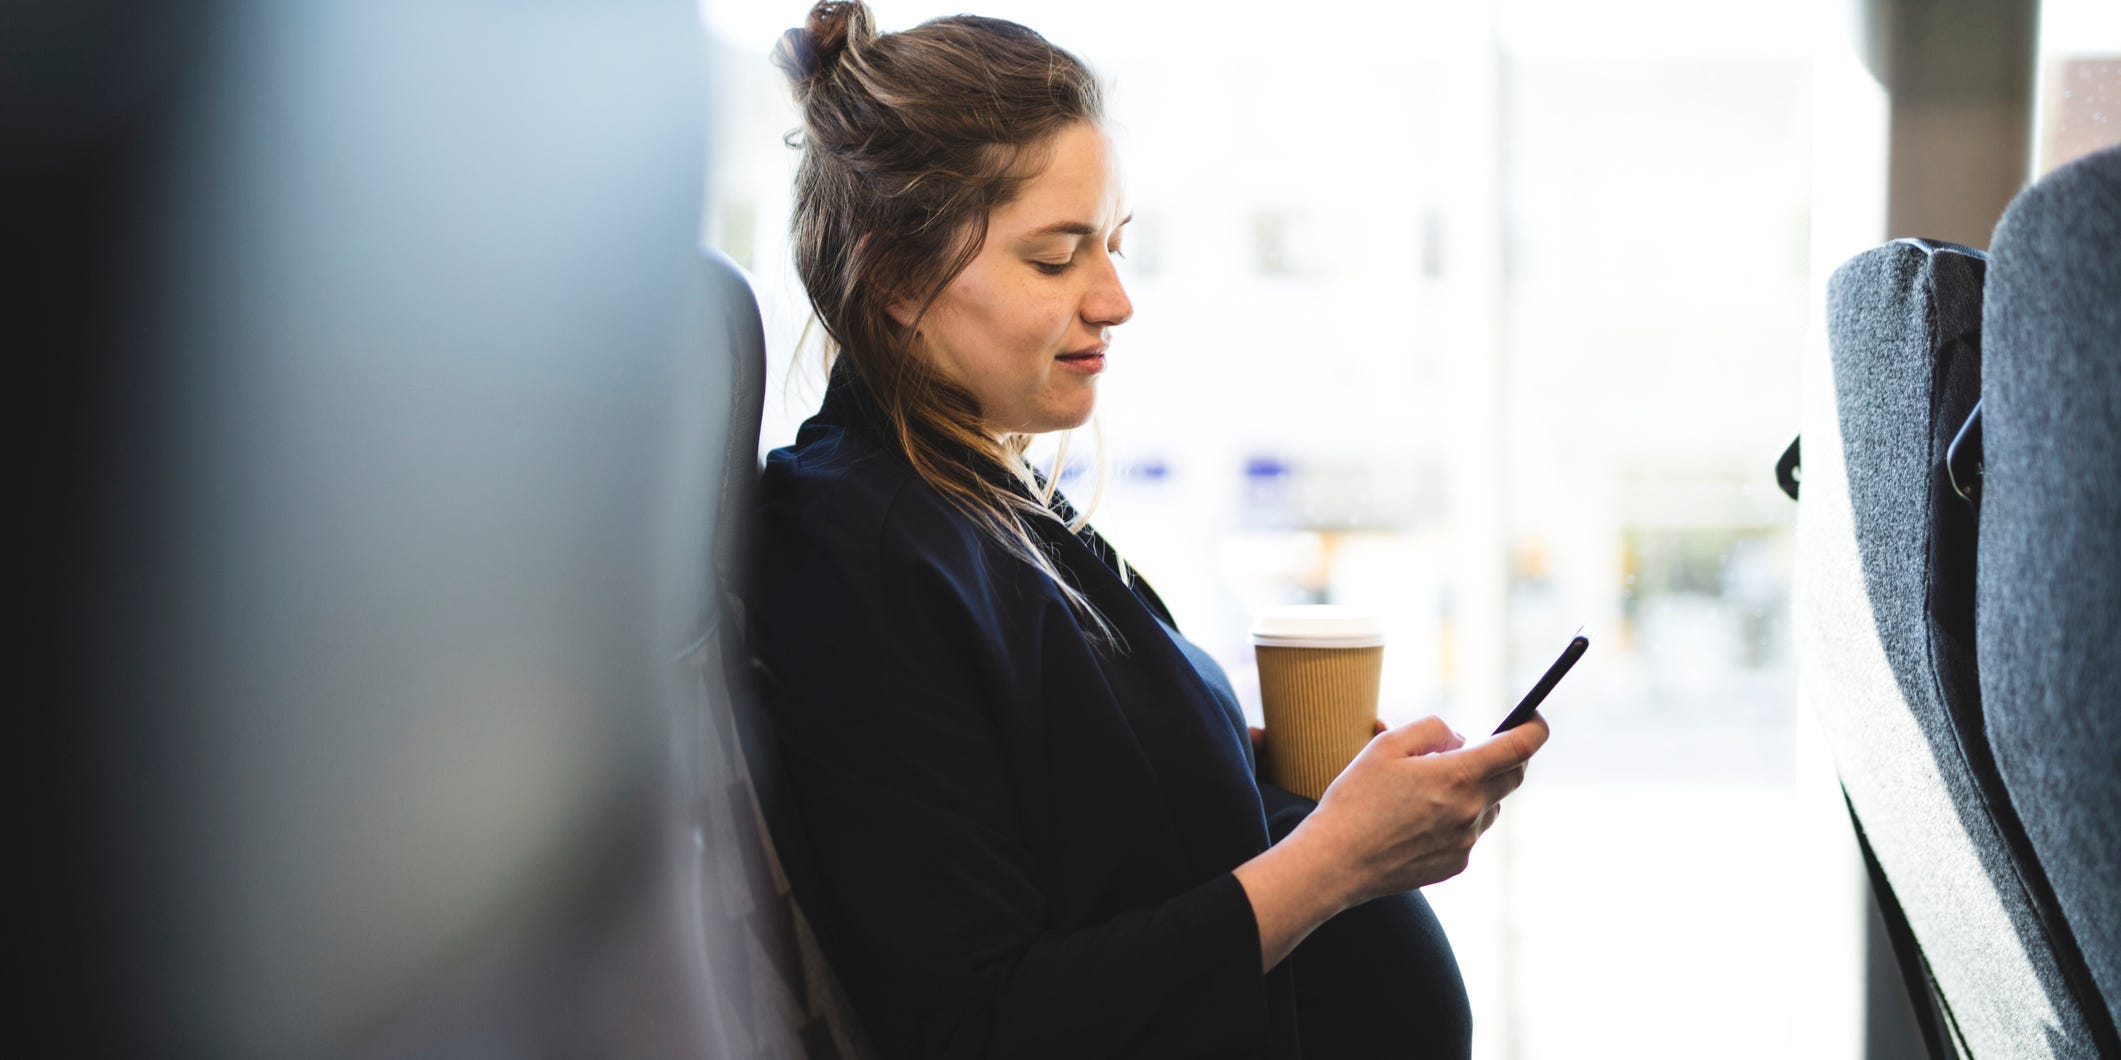 A pregnant woman texts on her phone while holding a cup of coffee.